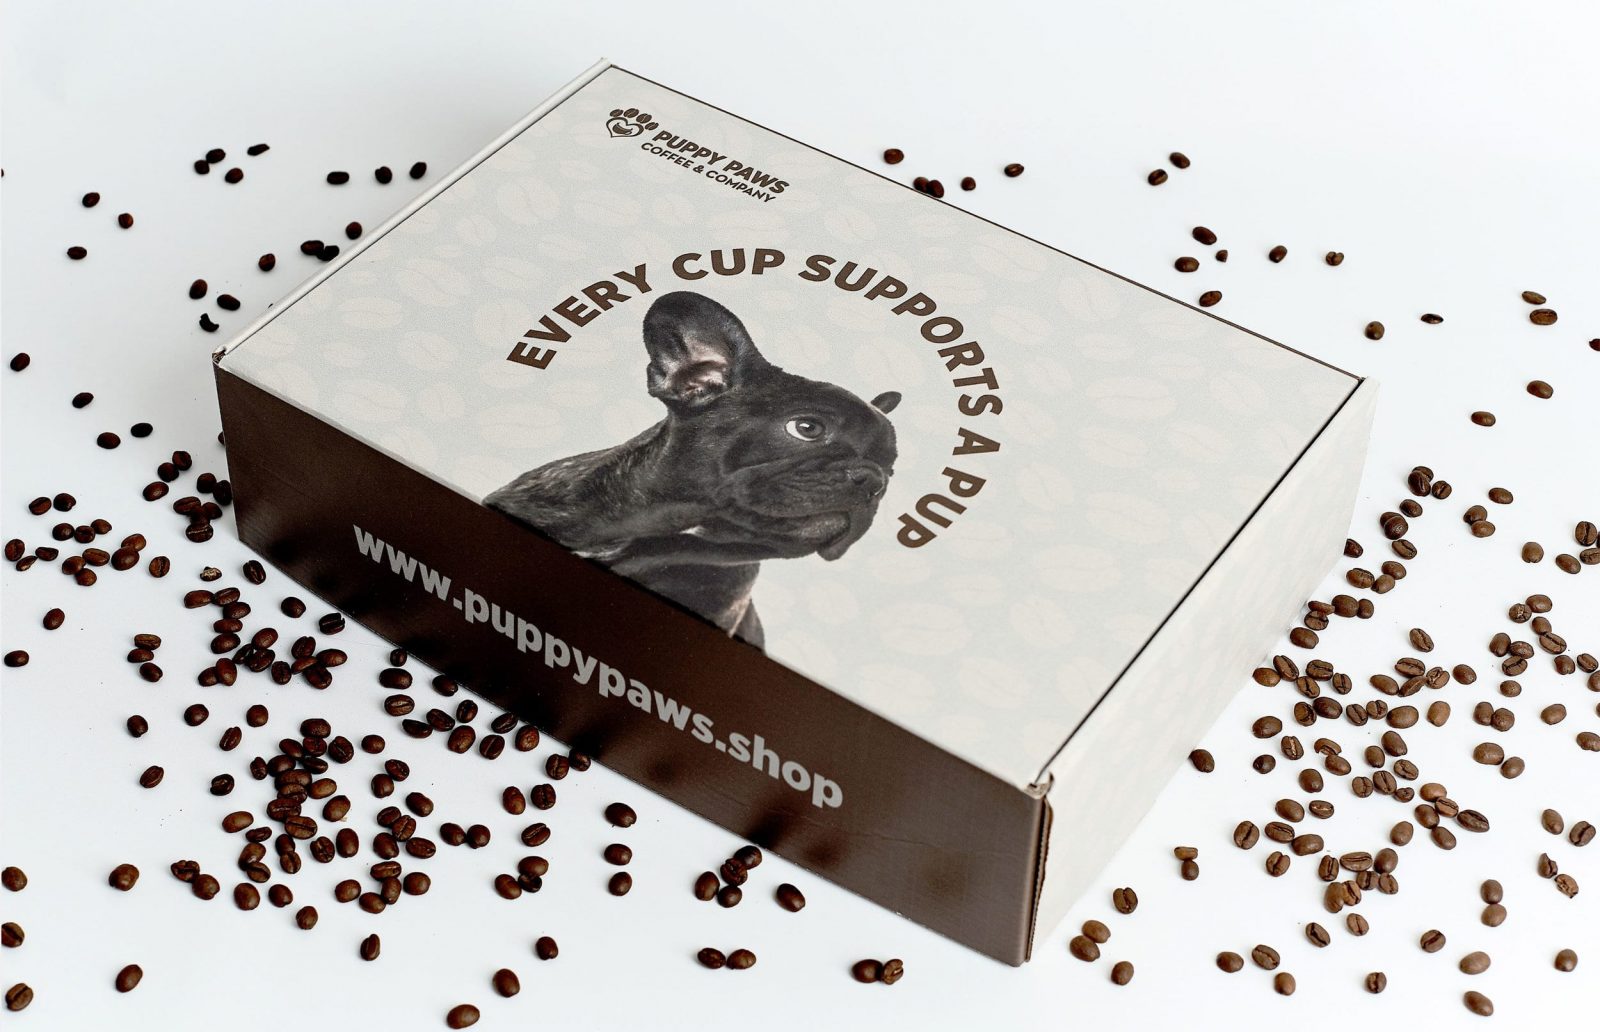 Furtastic Subscription Box and Packaging Design for Puppy Paws Coffee Company